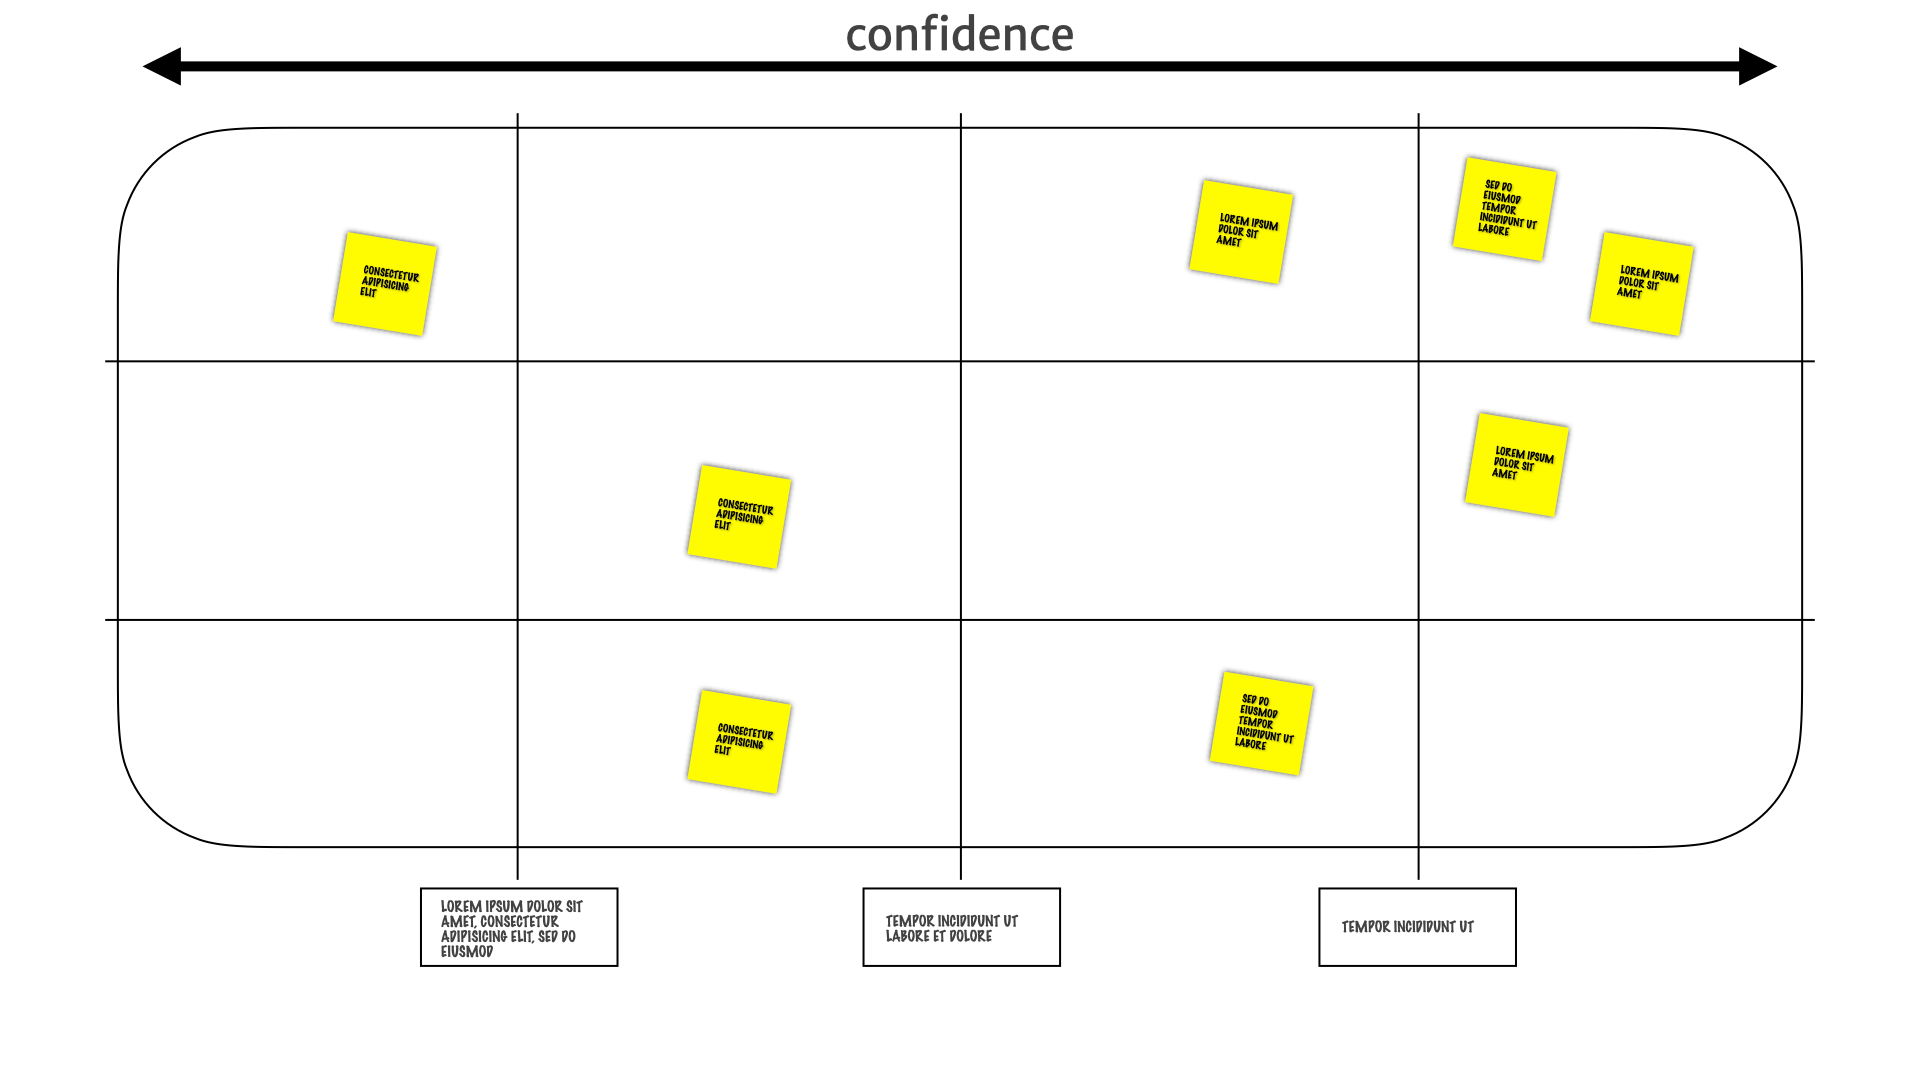 A pace layer mapping canvas — with the confidence dimension illustrated left-to-right.